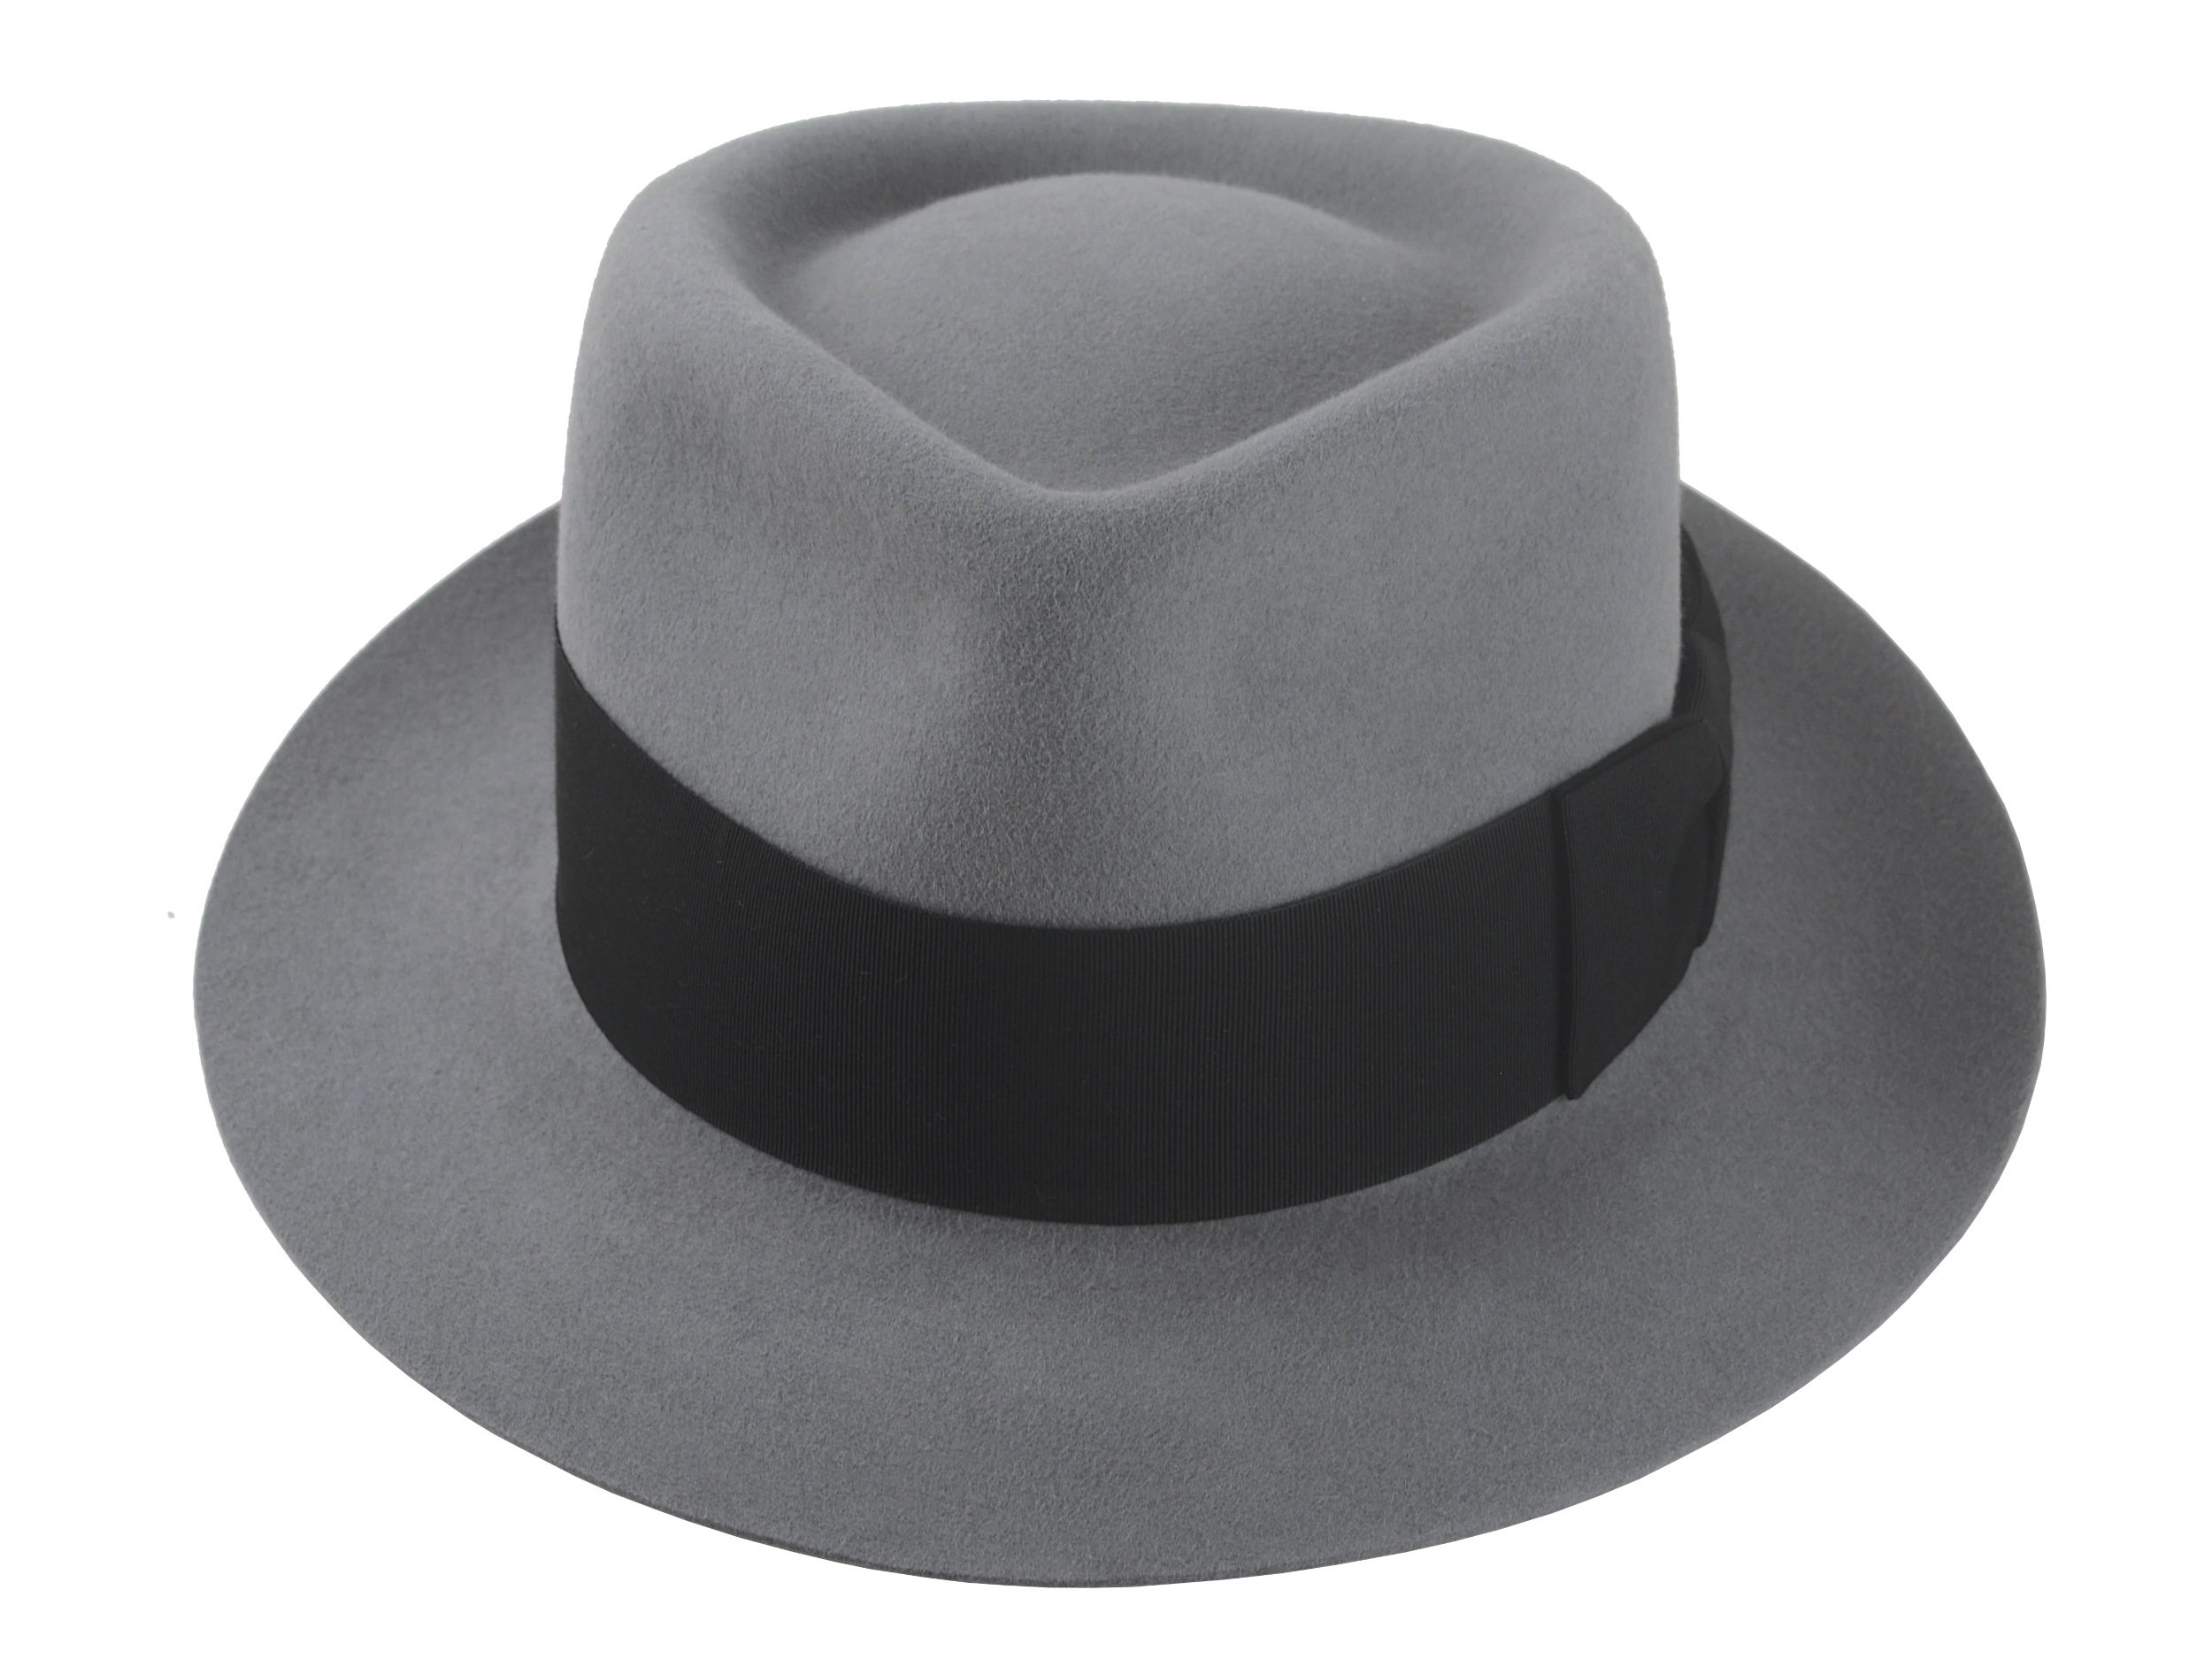 The Rick's Reserve Fedora - Detail shot emphasizing the craftsmanship on the pinch front crown | Agnoulita Hats